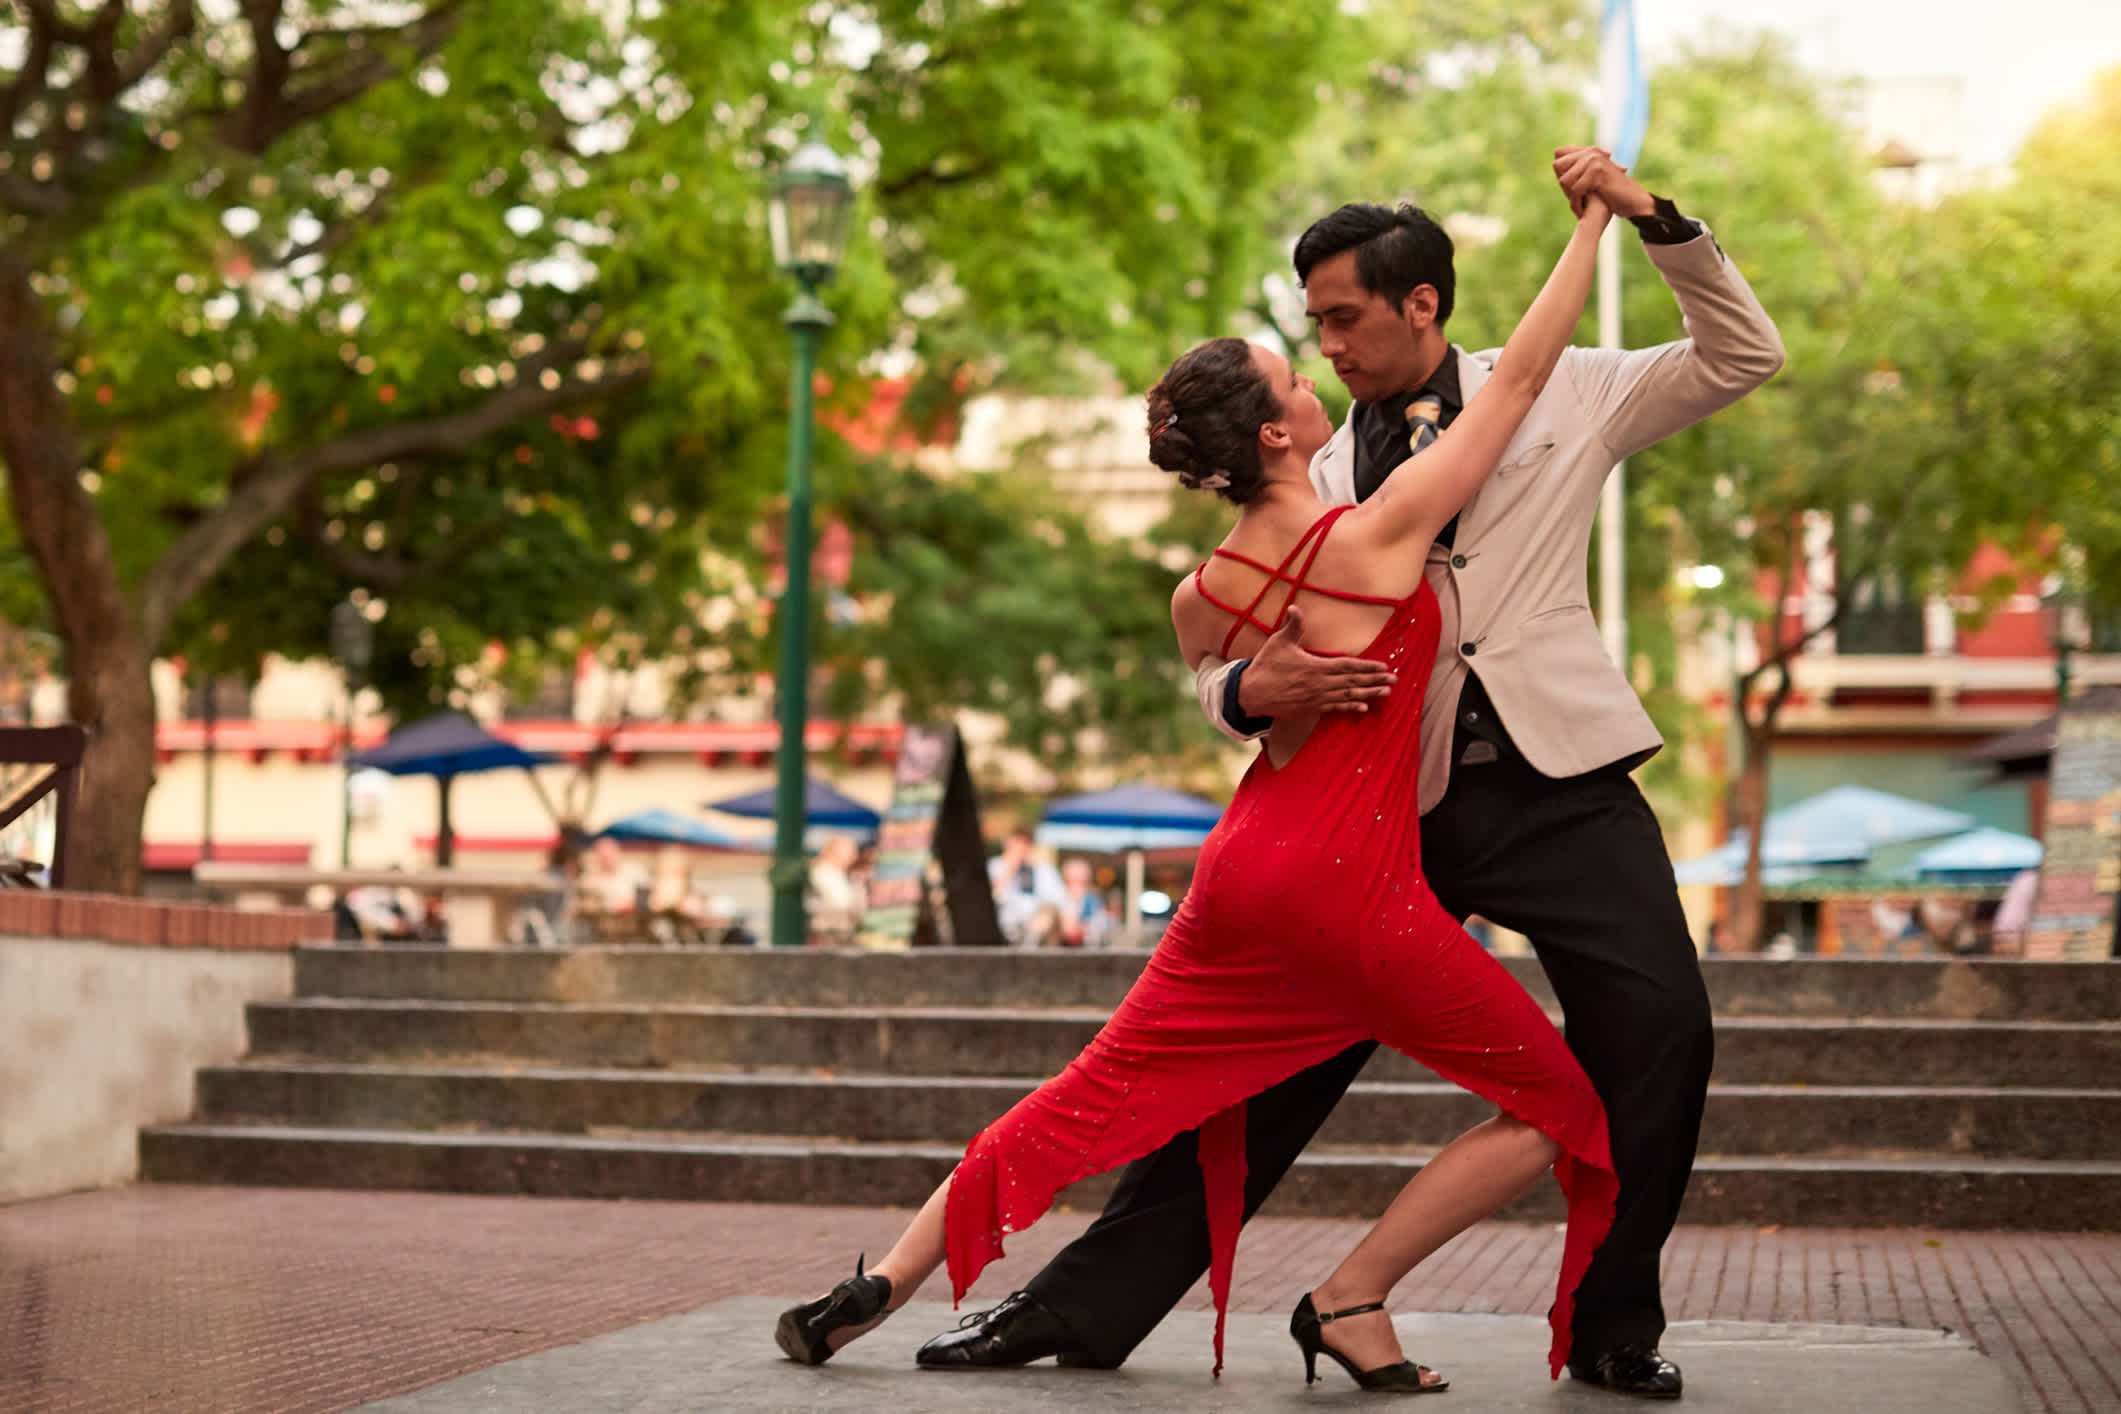 Tango dancers performing on the streets of Buenos Aires.
